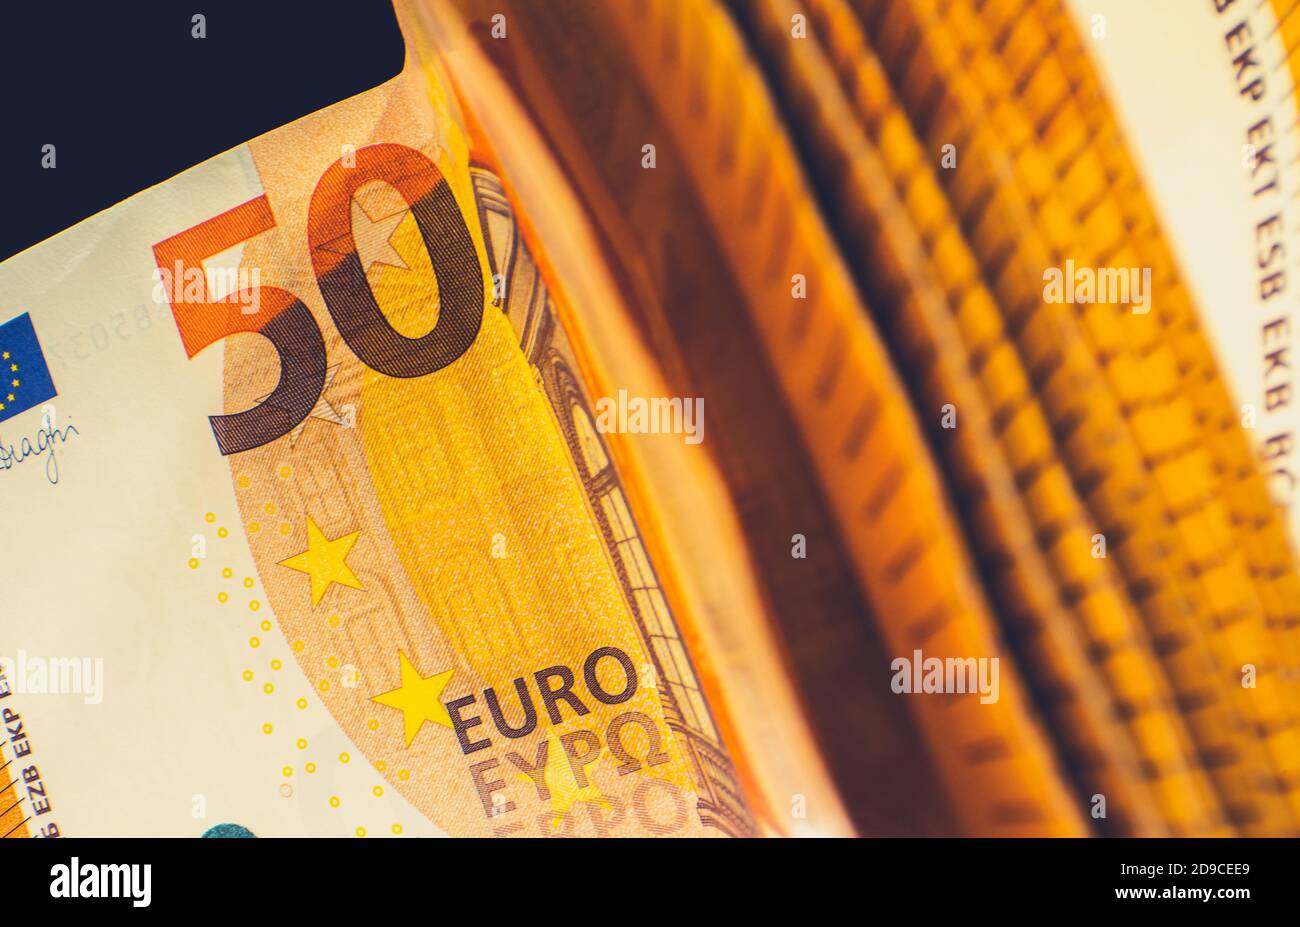 European Currency Fifty Euros Banknotes. Euro Cash Money Close Up. Financial and Banking Theme. Stock Photo